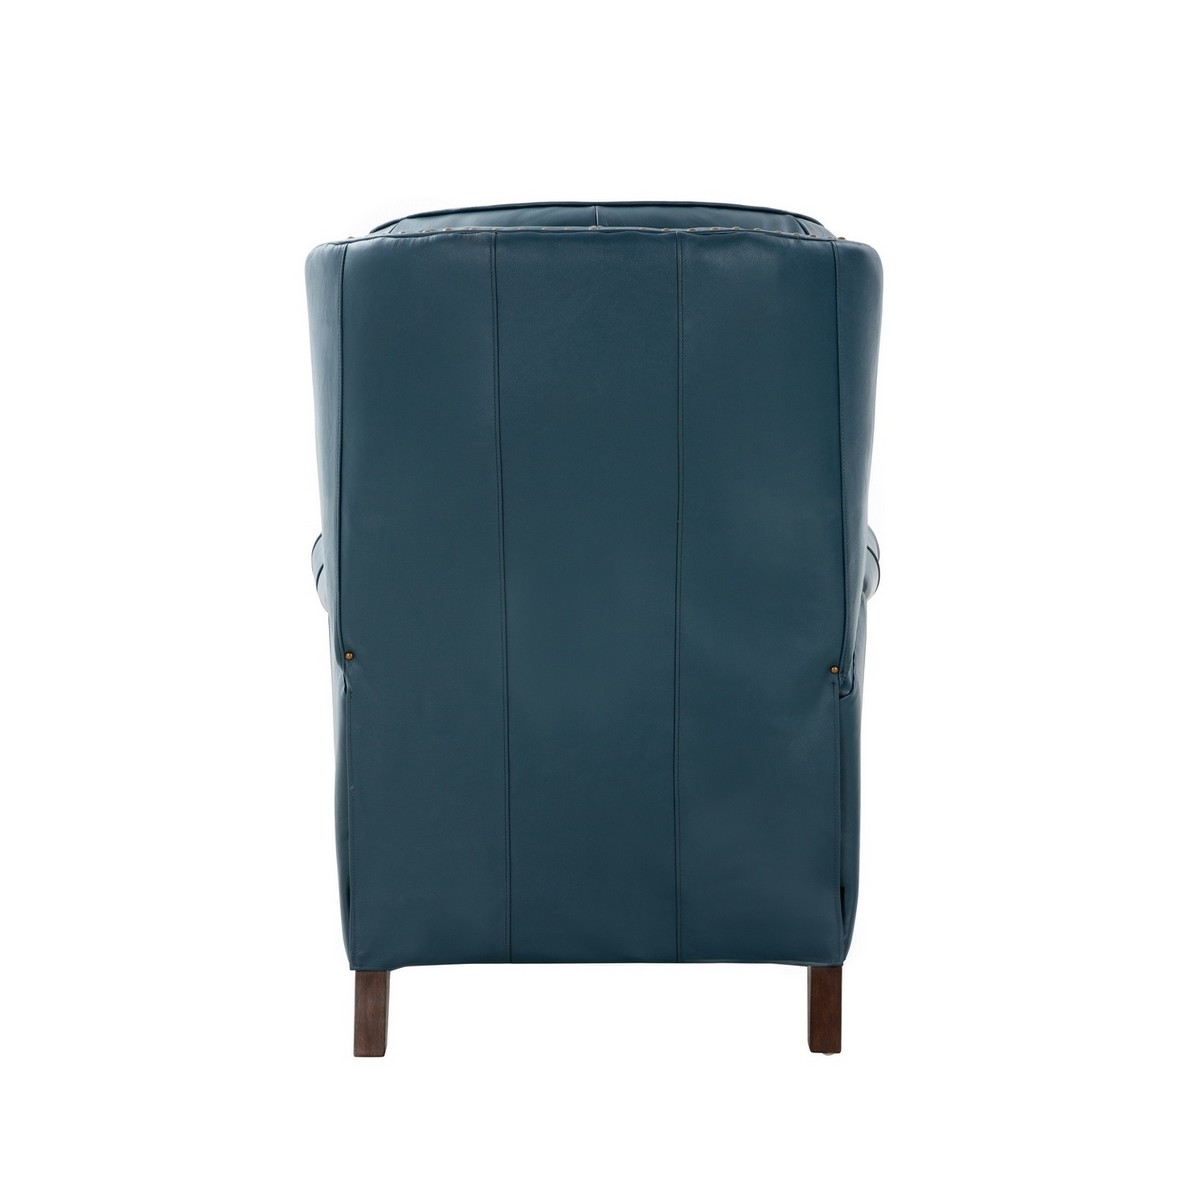 Barcalounger Kendall Recliner Chair - Prestin Yale Blue/All Leather